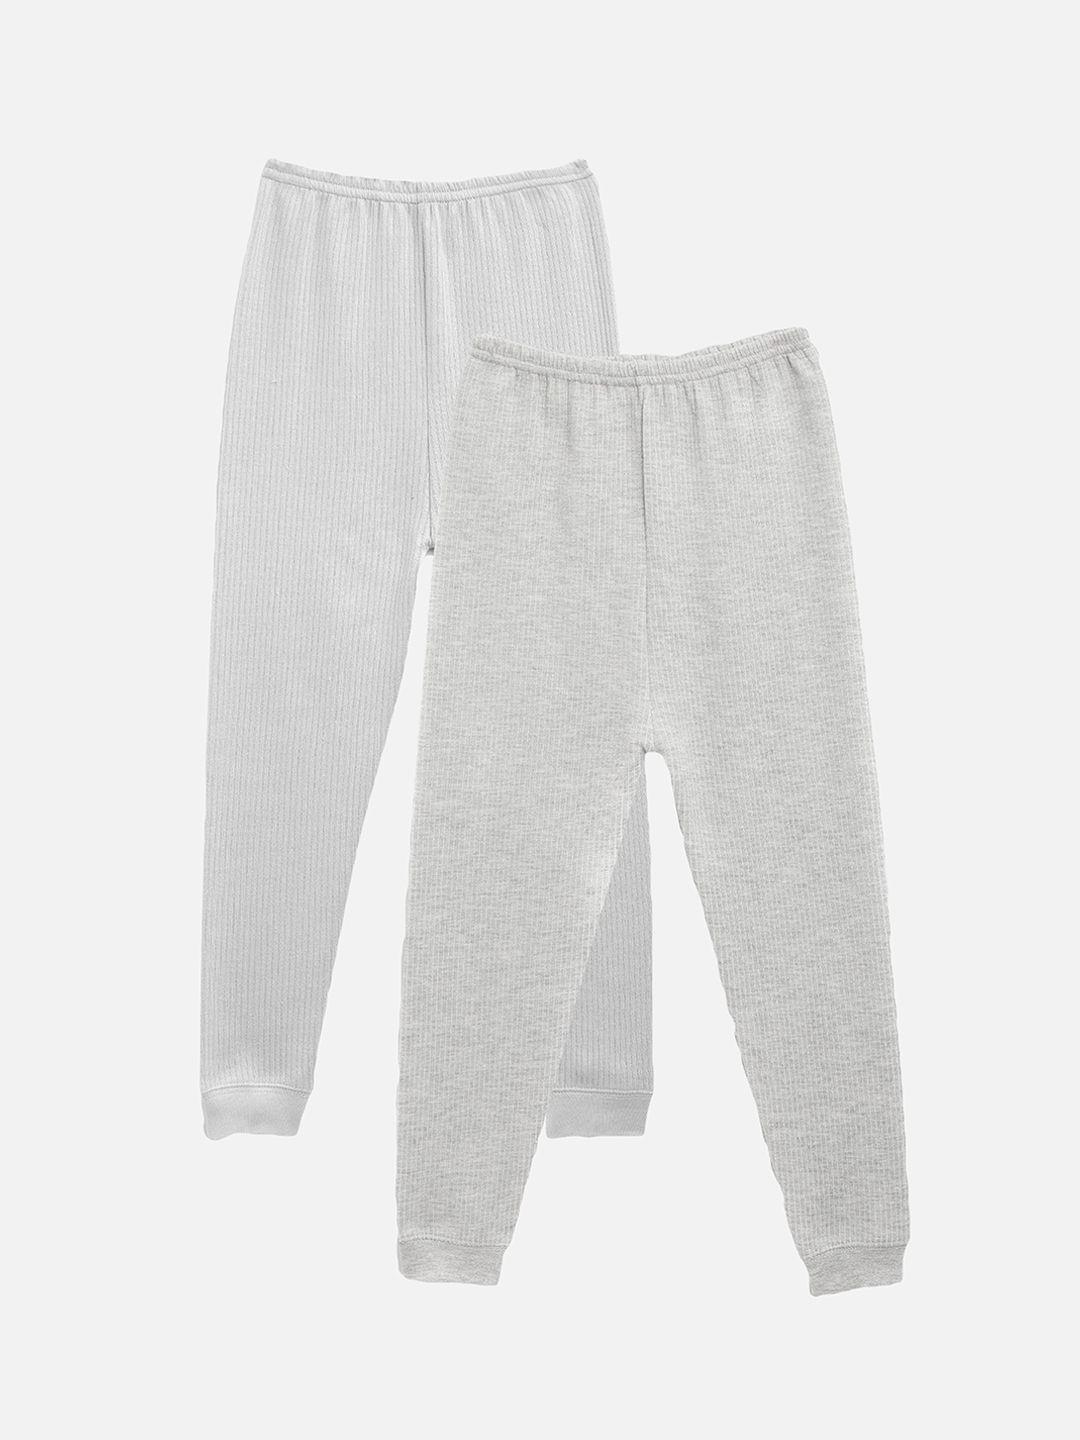 kanvin-boys-pack-of-2-grey-solid-thermal-bottoms